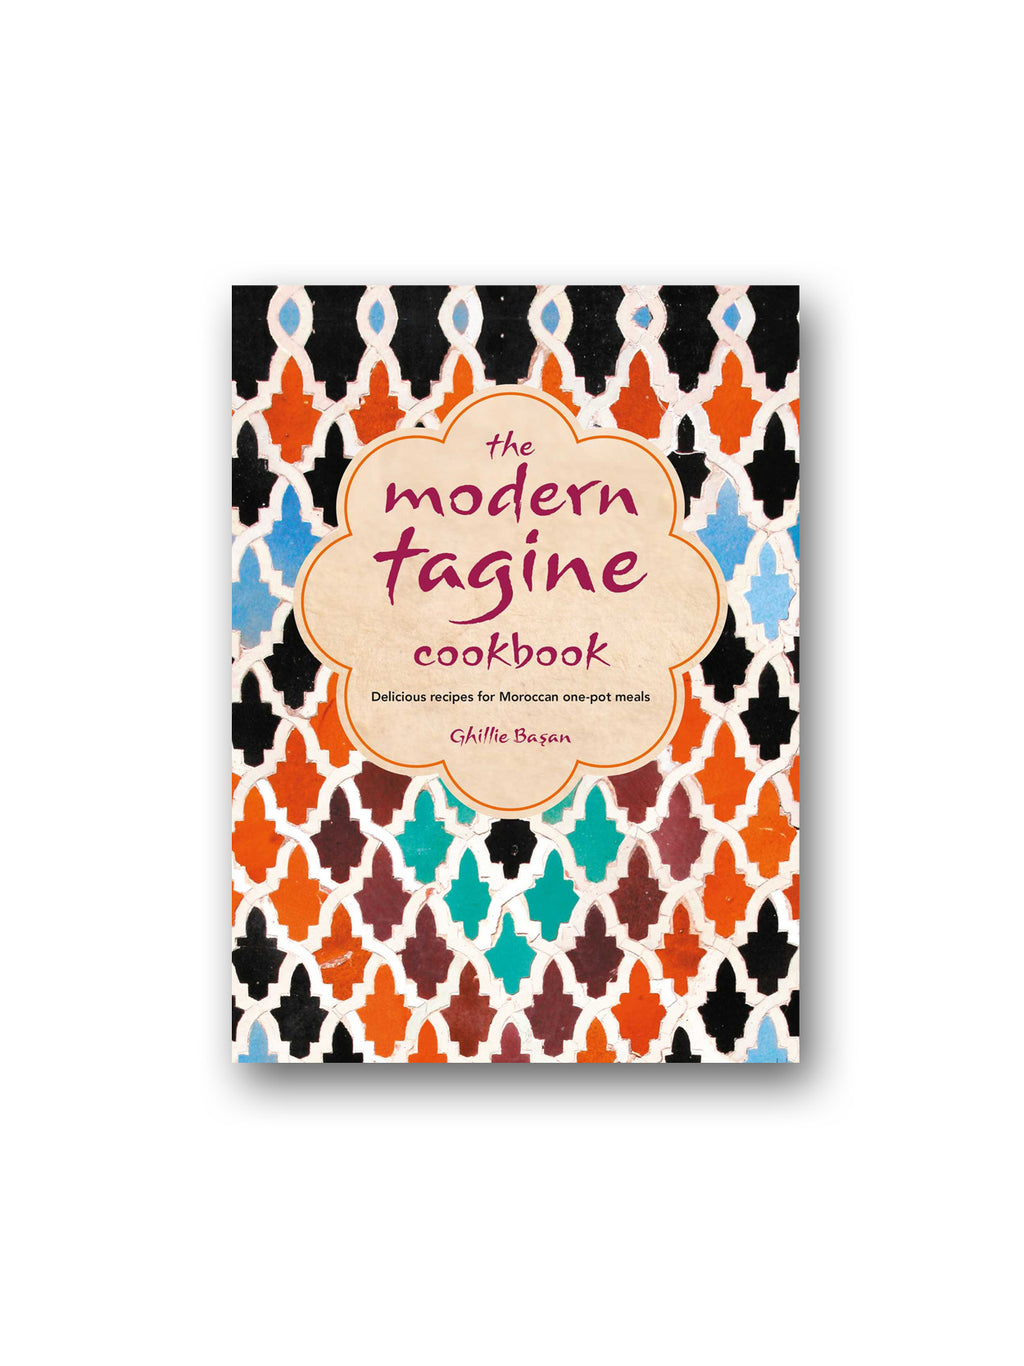 The Modern Tagine Cookbook : Delicious Recipes for Moroccan One-Pot Meals